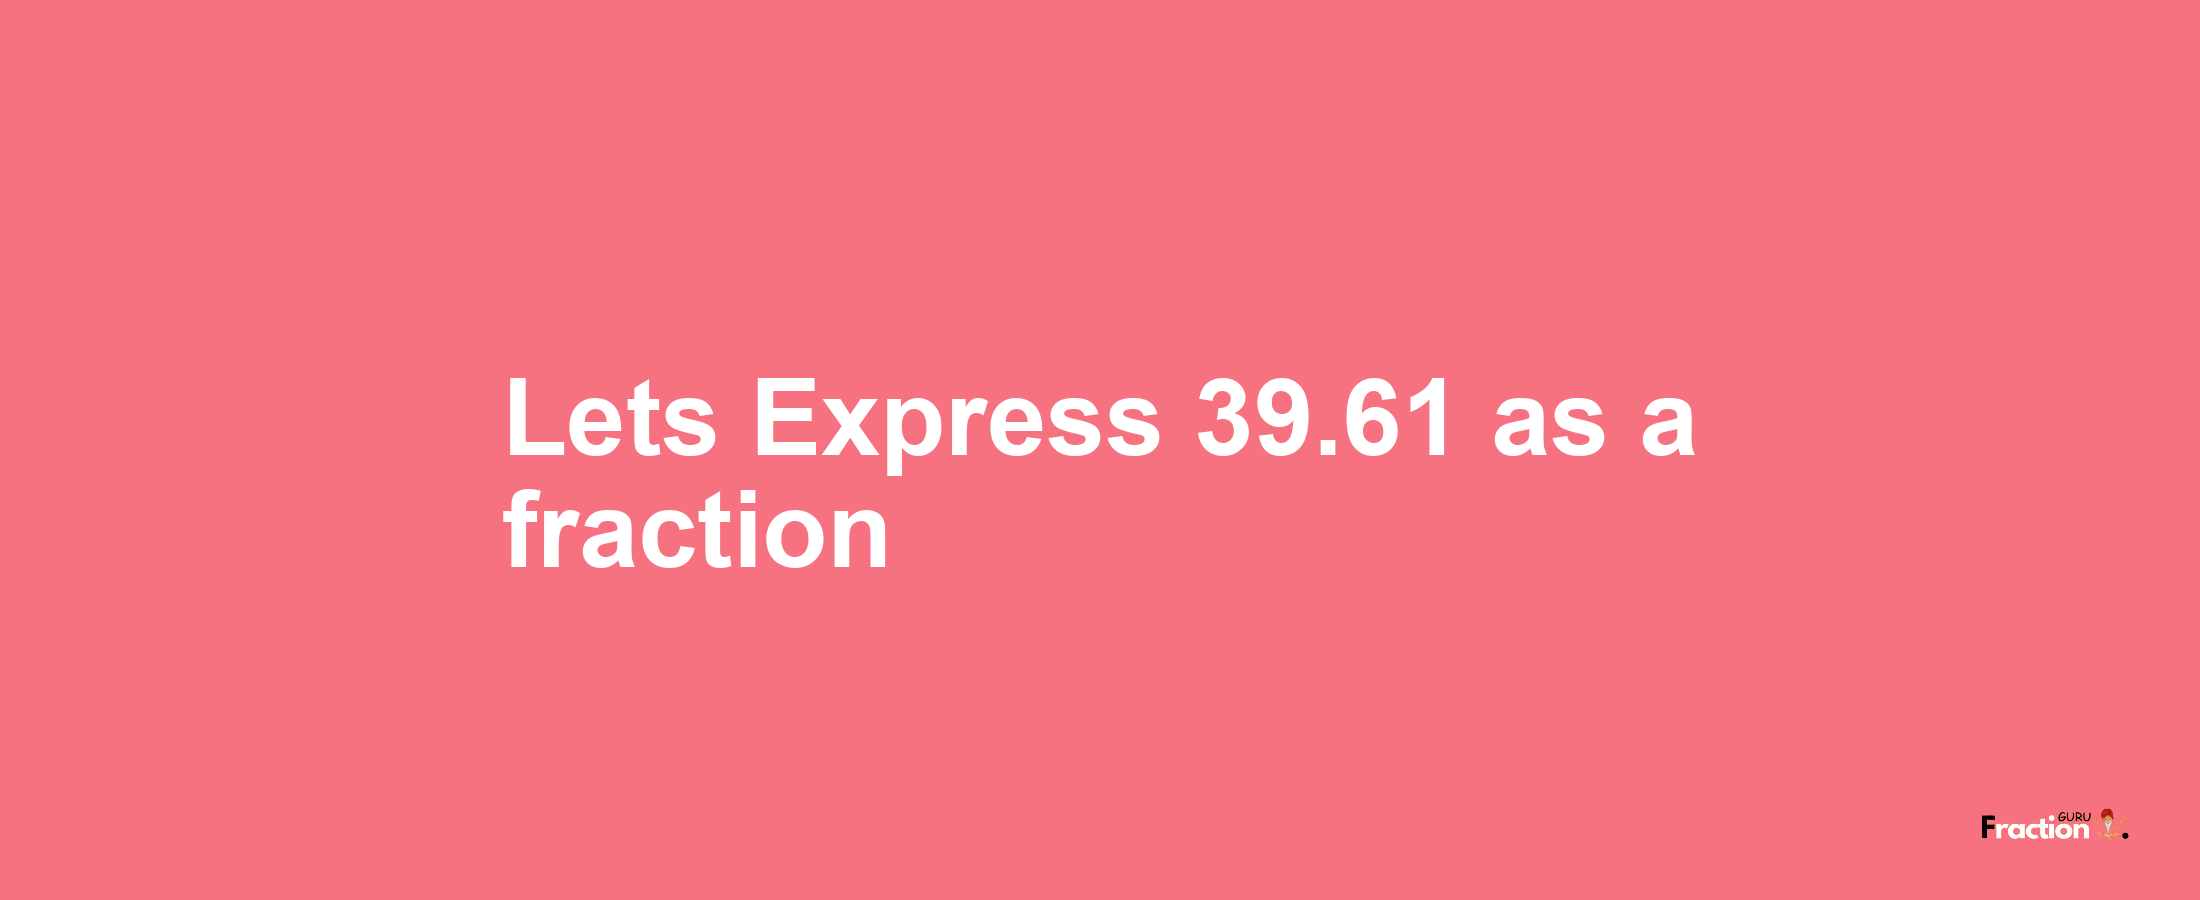 Lets Express 39.61 as afraction